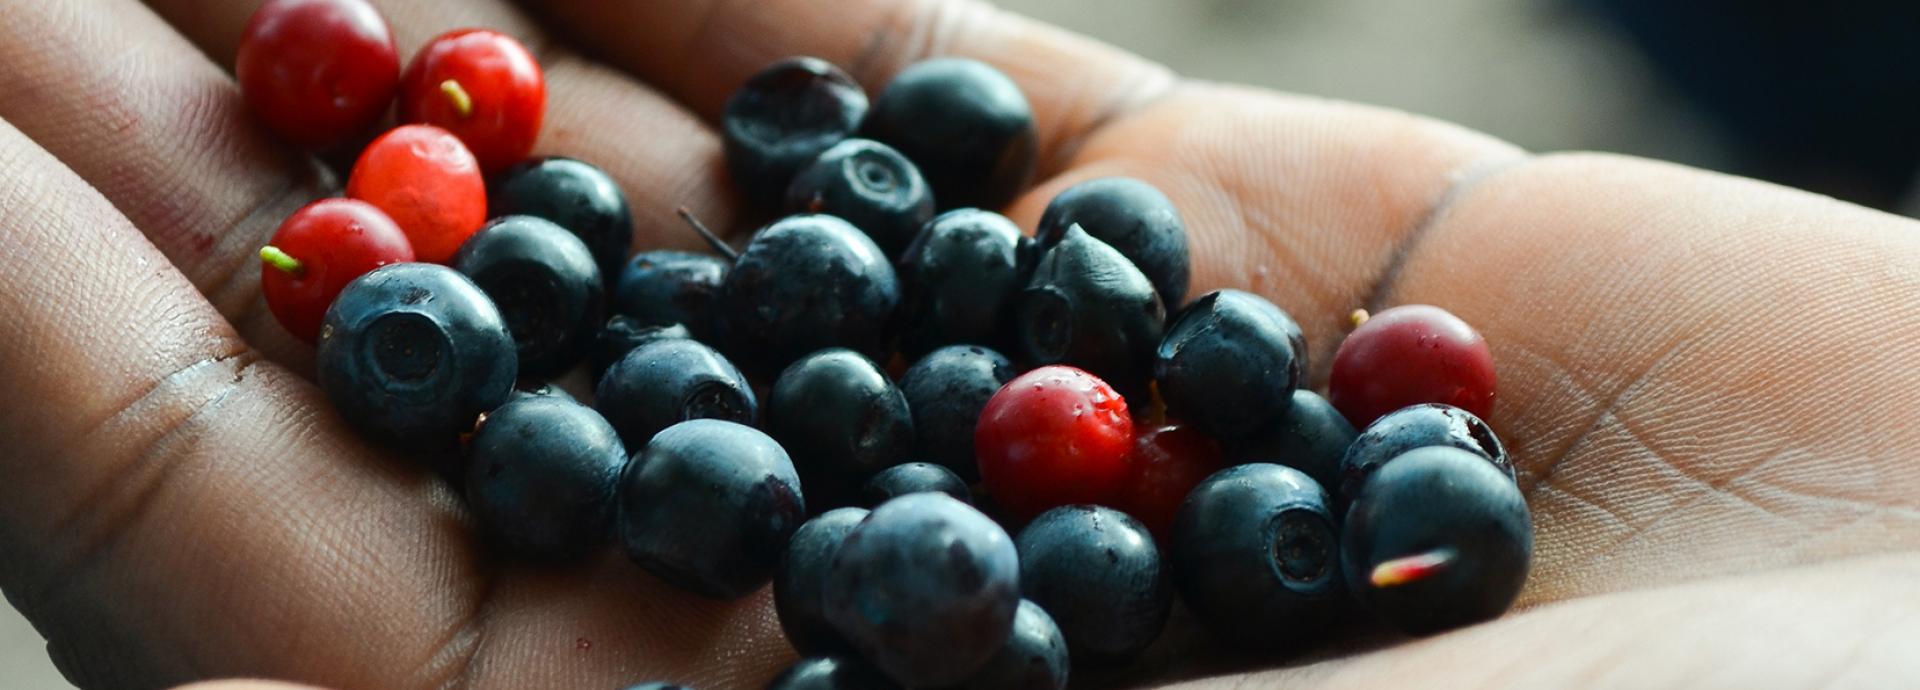 A hand holding Finnish forest berries